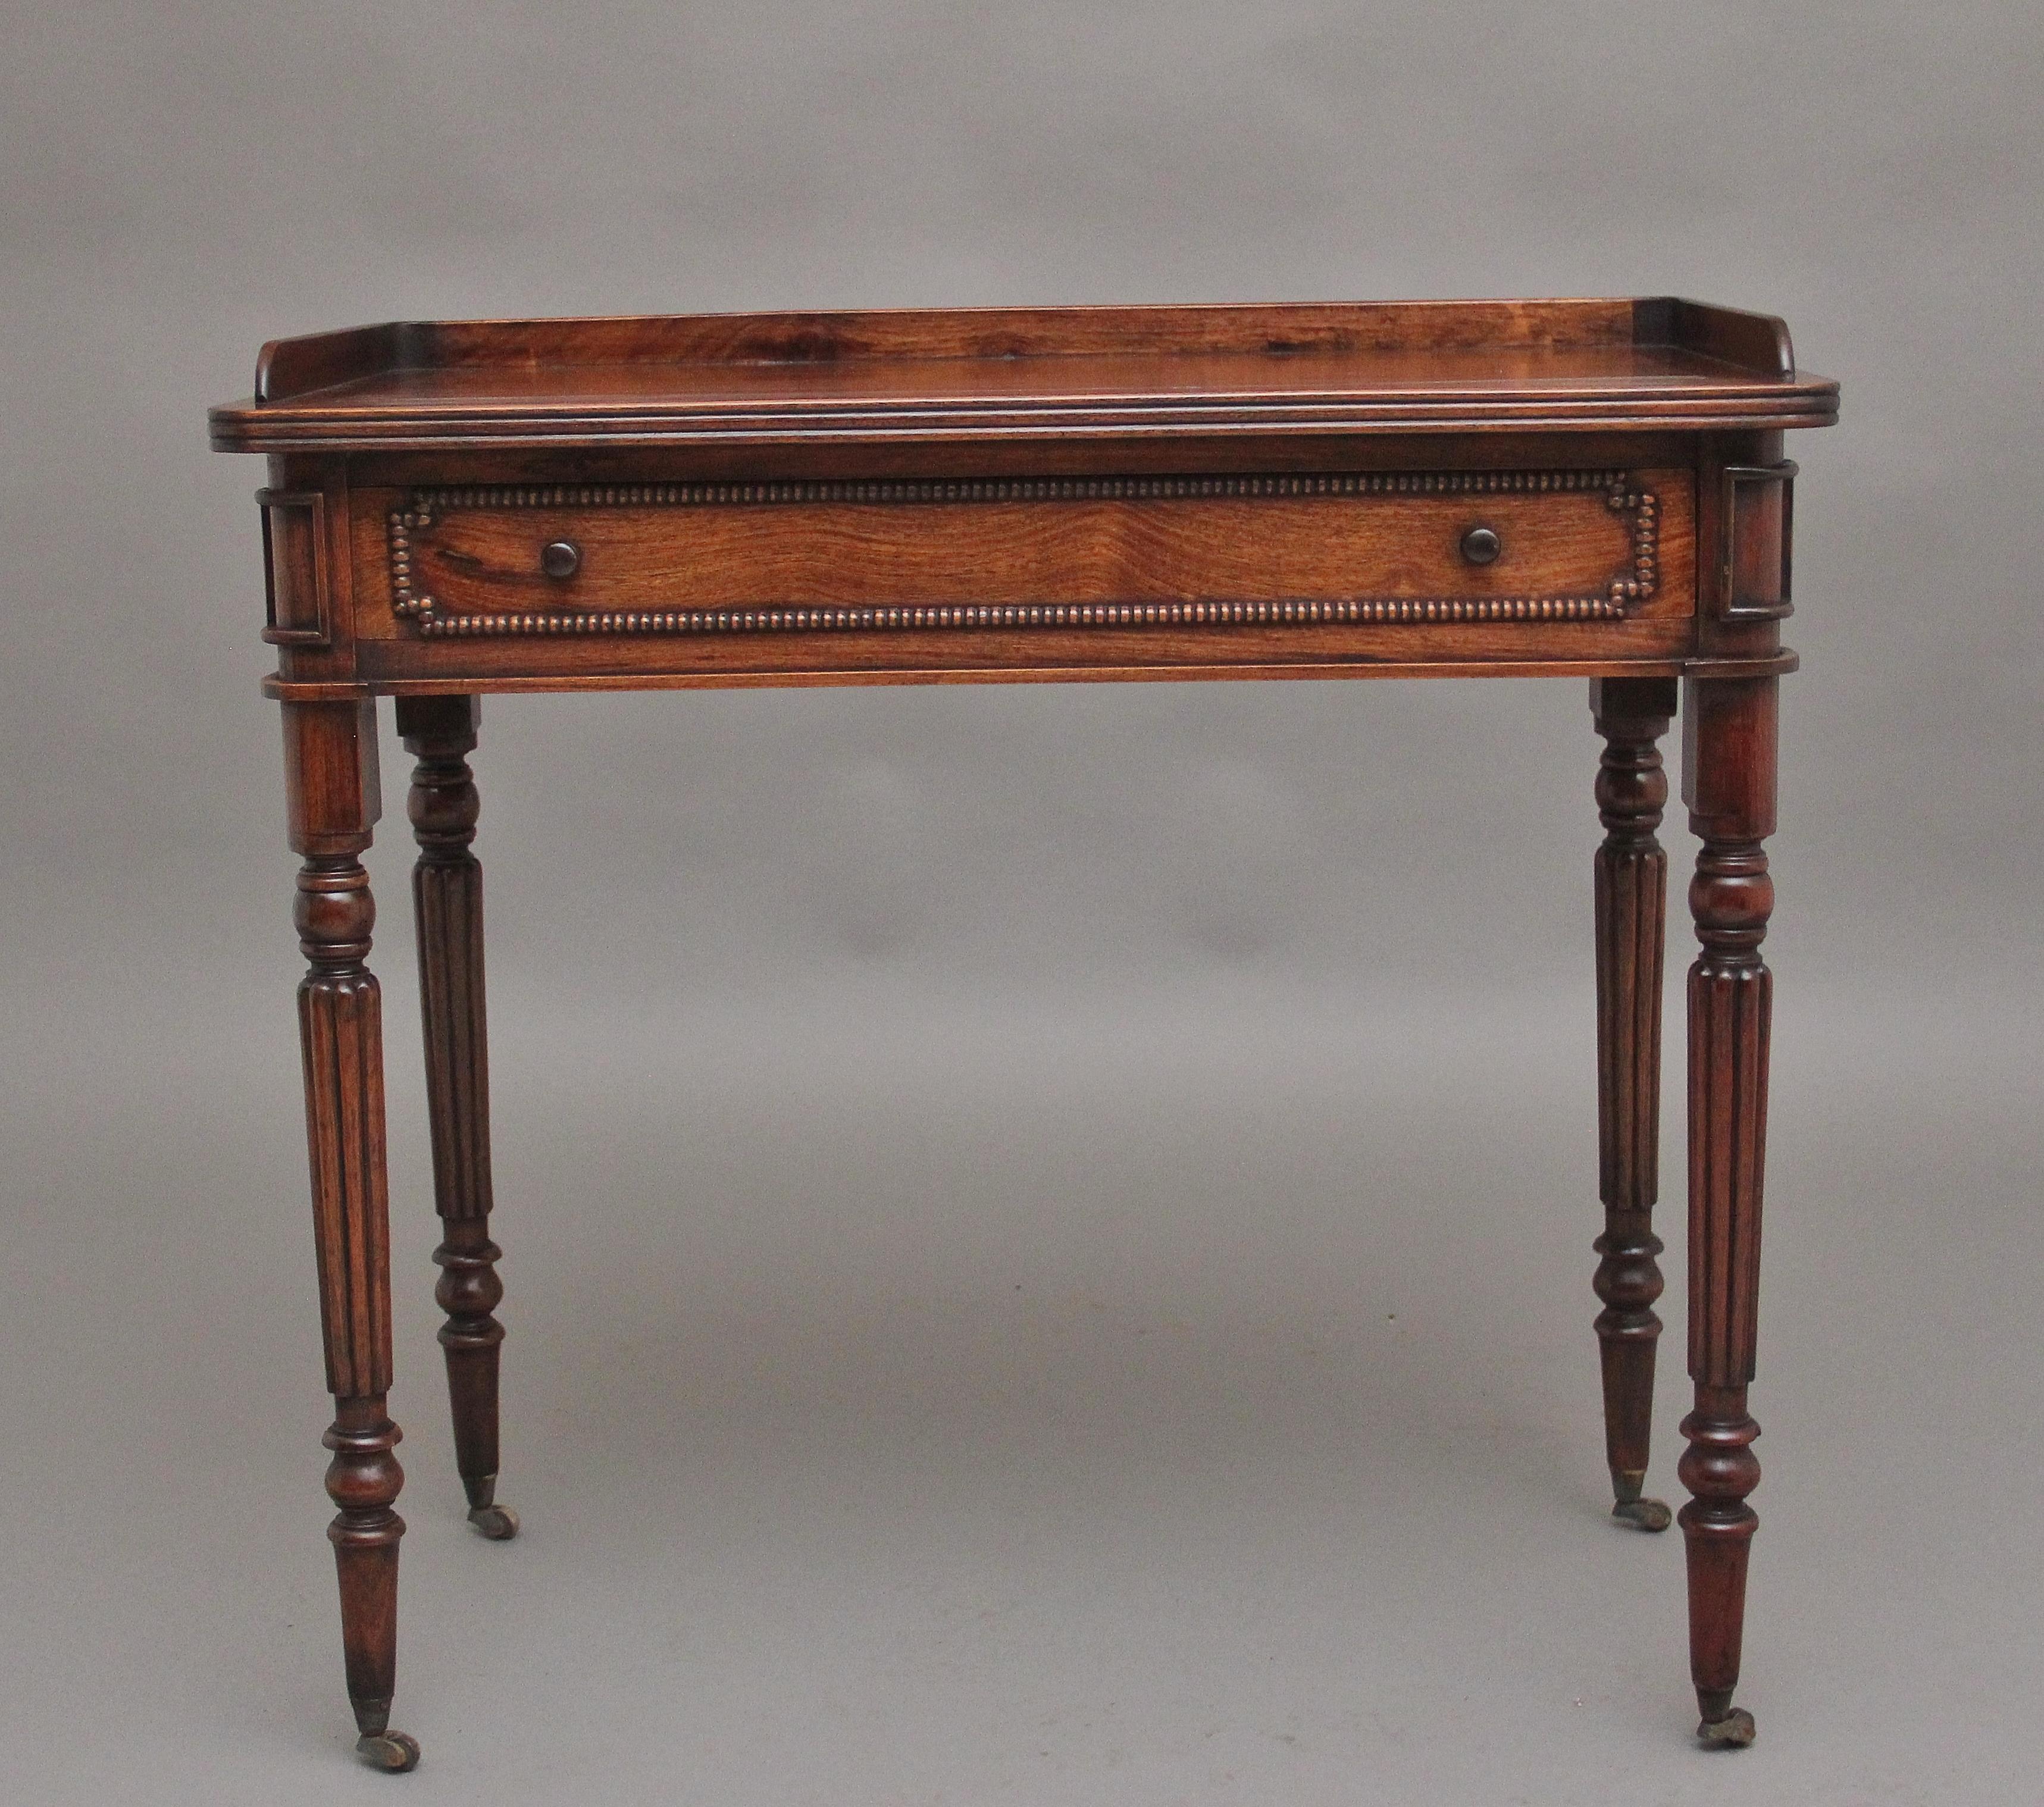 A lovely quality freestanding early 19th Century Anglo Indian side table, having a nice figured top with a reeded edge and having a raised gallery, a single frieze drawer below with the original turned wooden knob handles and decorative intricate